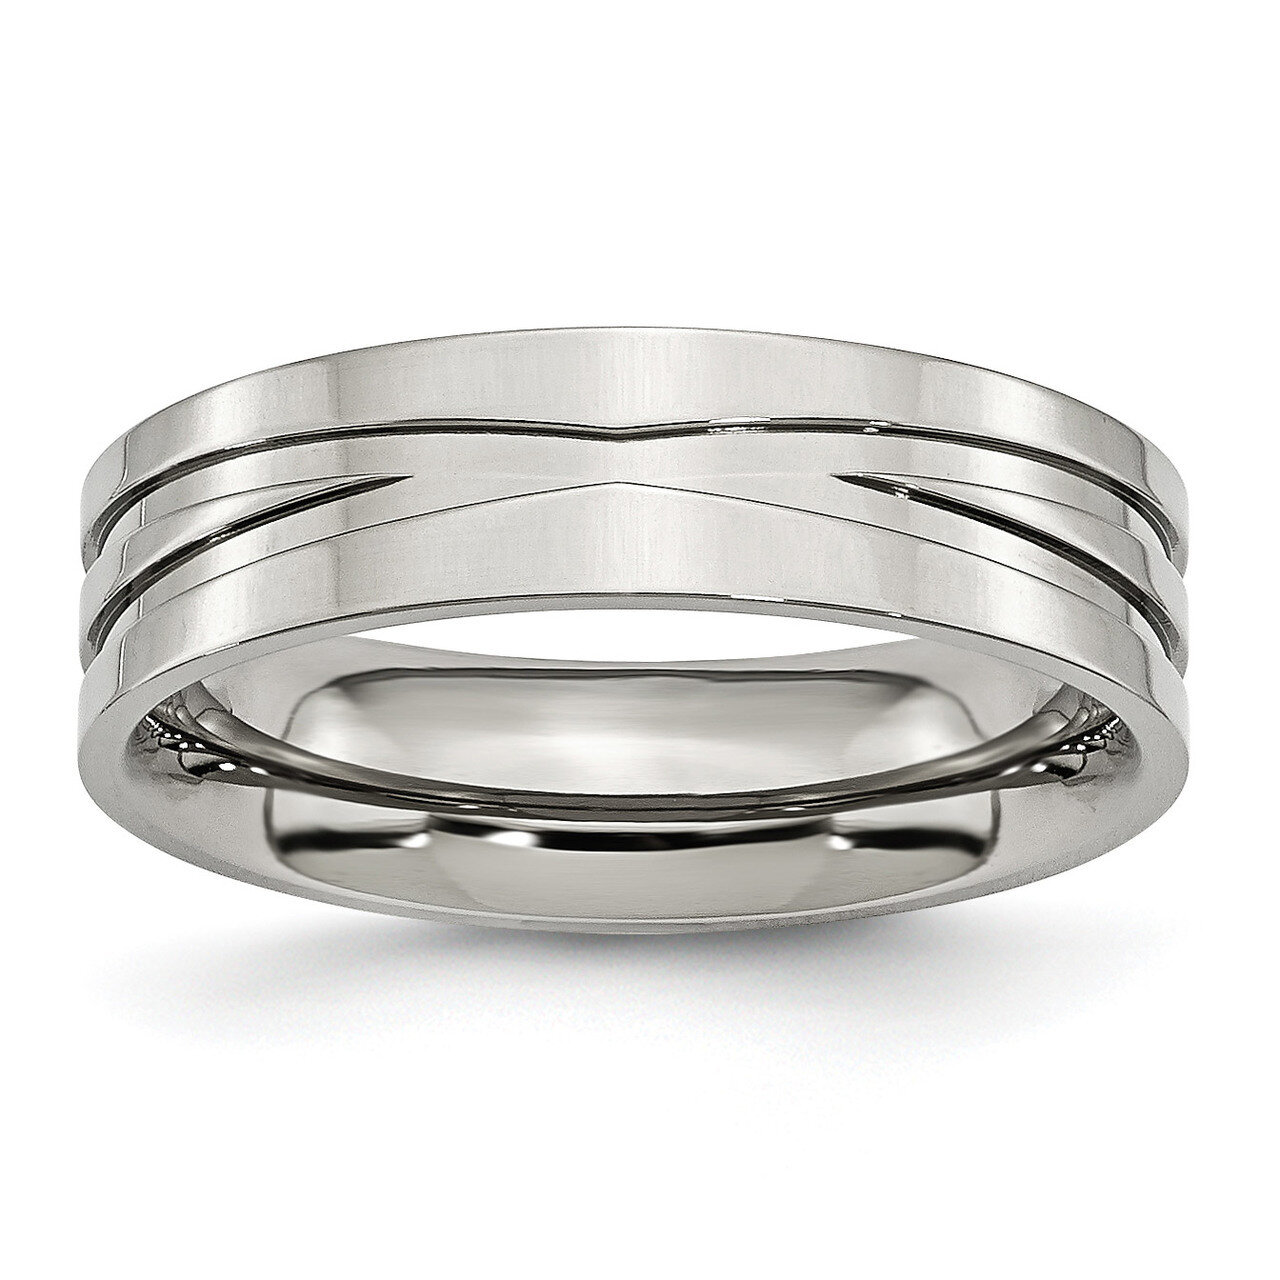 Grooved 6mm Polished Band Stainless Steel SR99-10